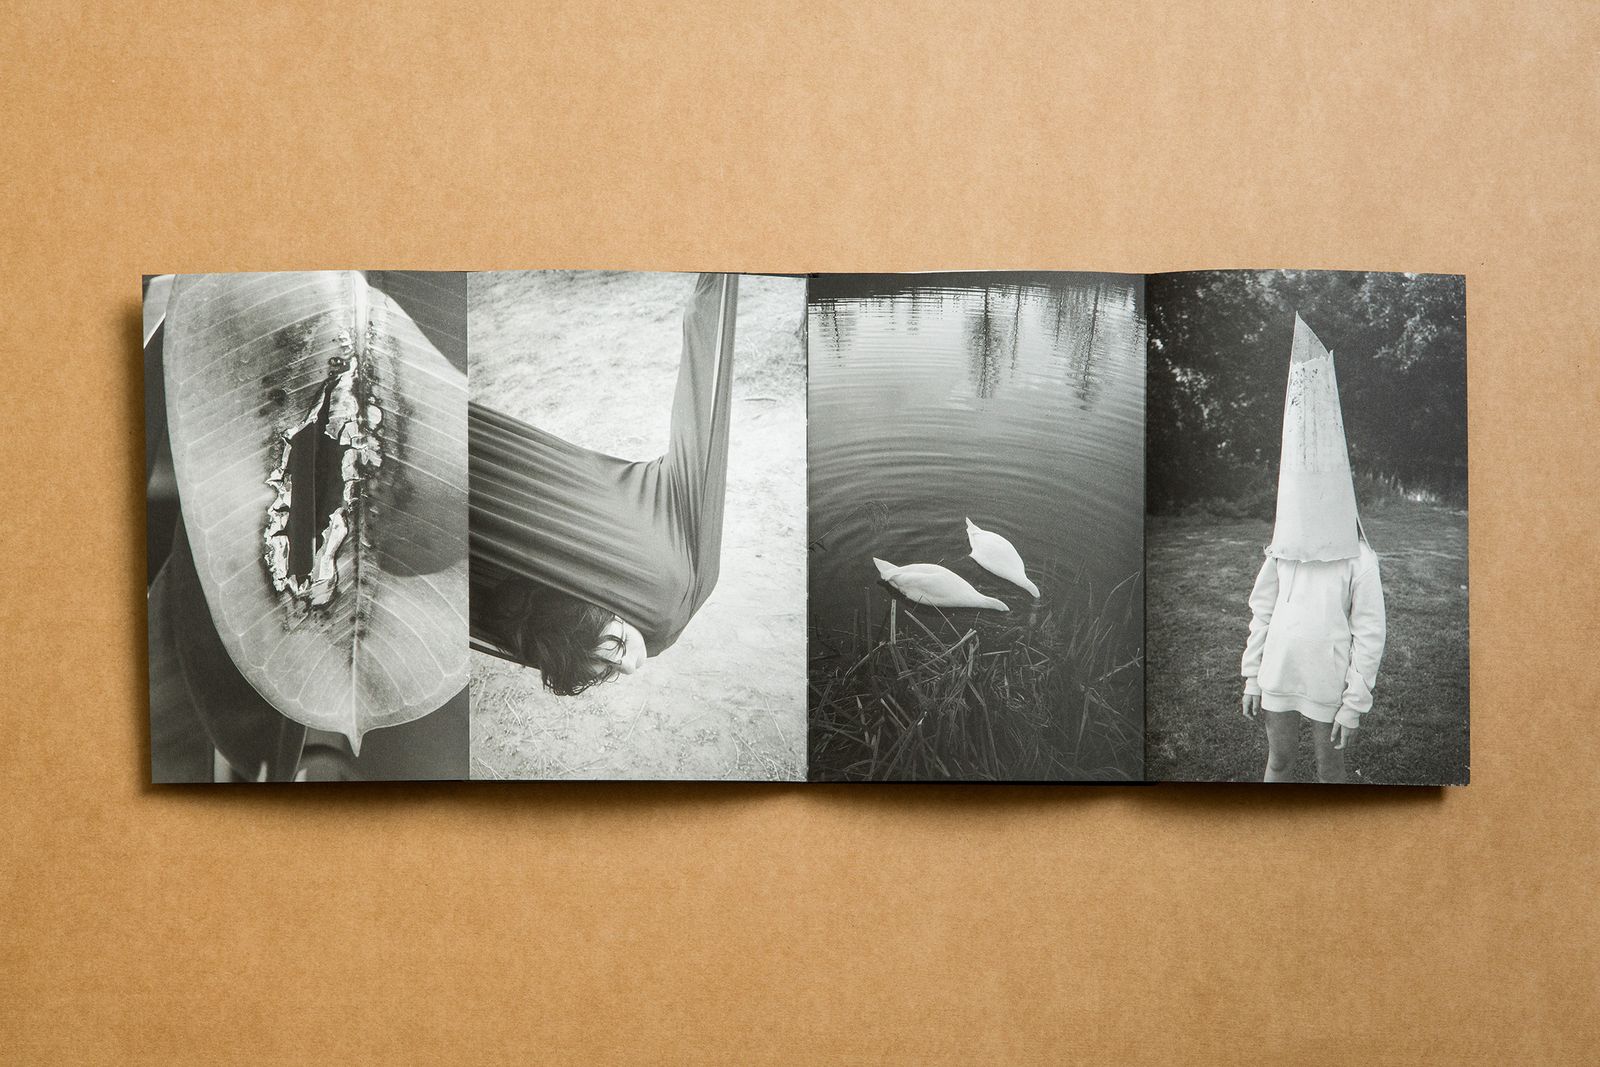 Photobook Review: Summer's Almost Gone By Alex Llovet